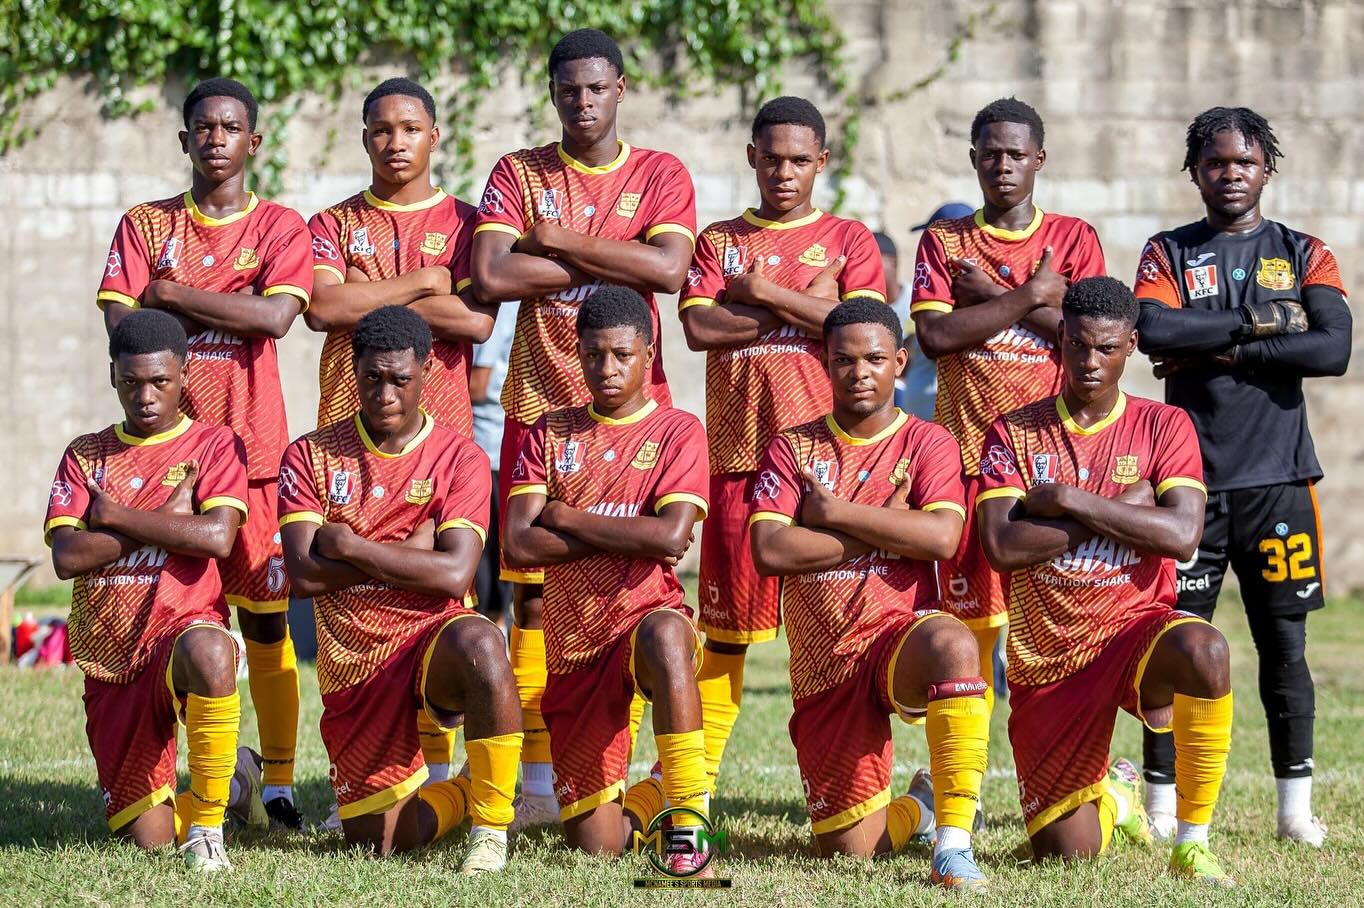 Dinthill Technical team defeated Garvey Maceo 3-0 to advance to the 2023 DaCosta Cup semi-finals